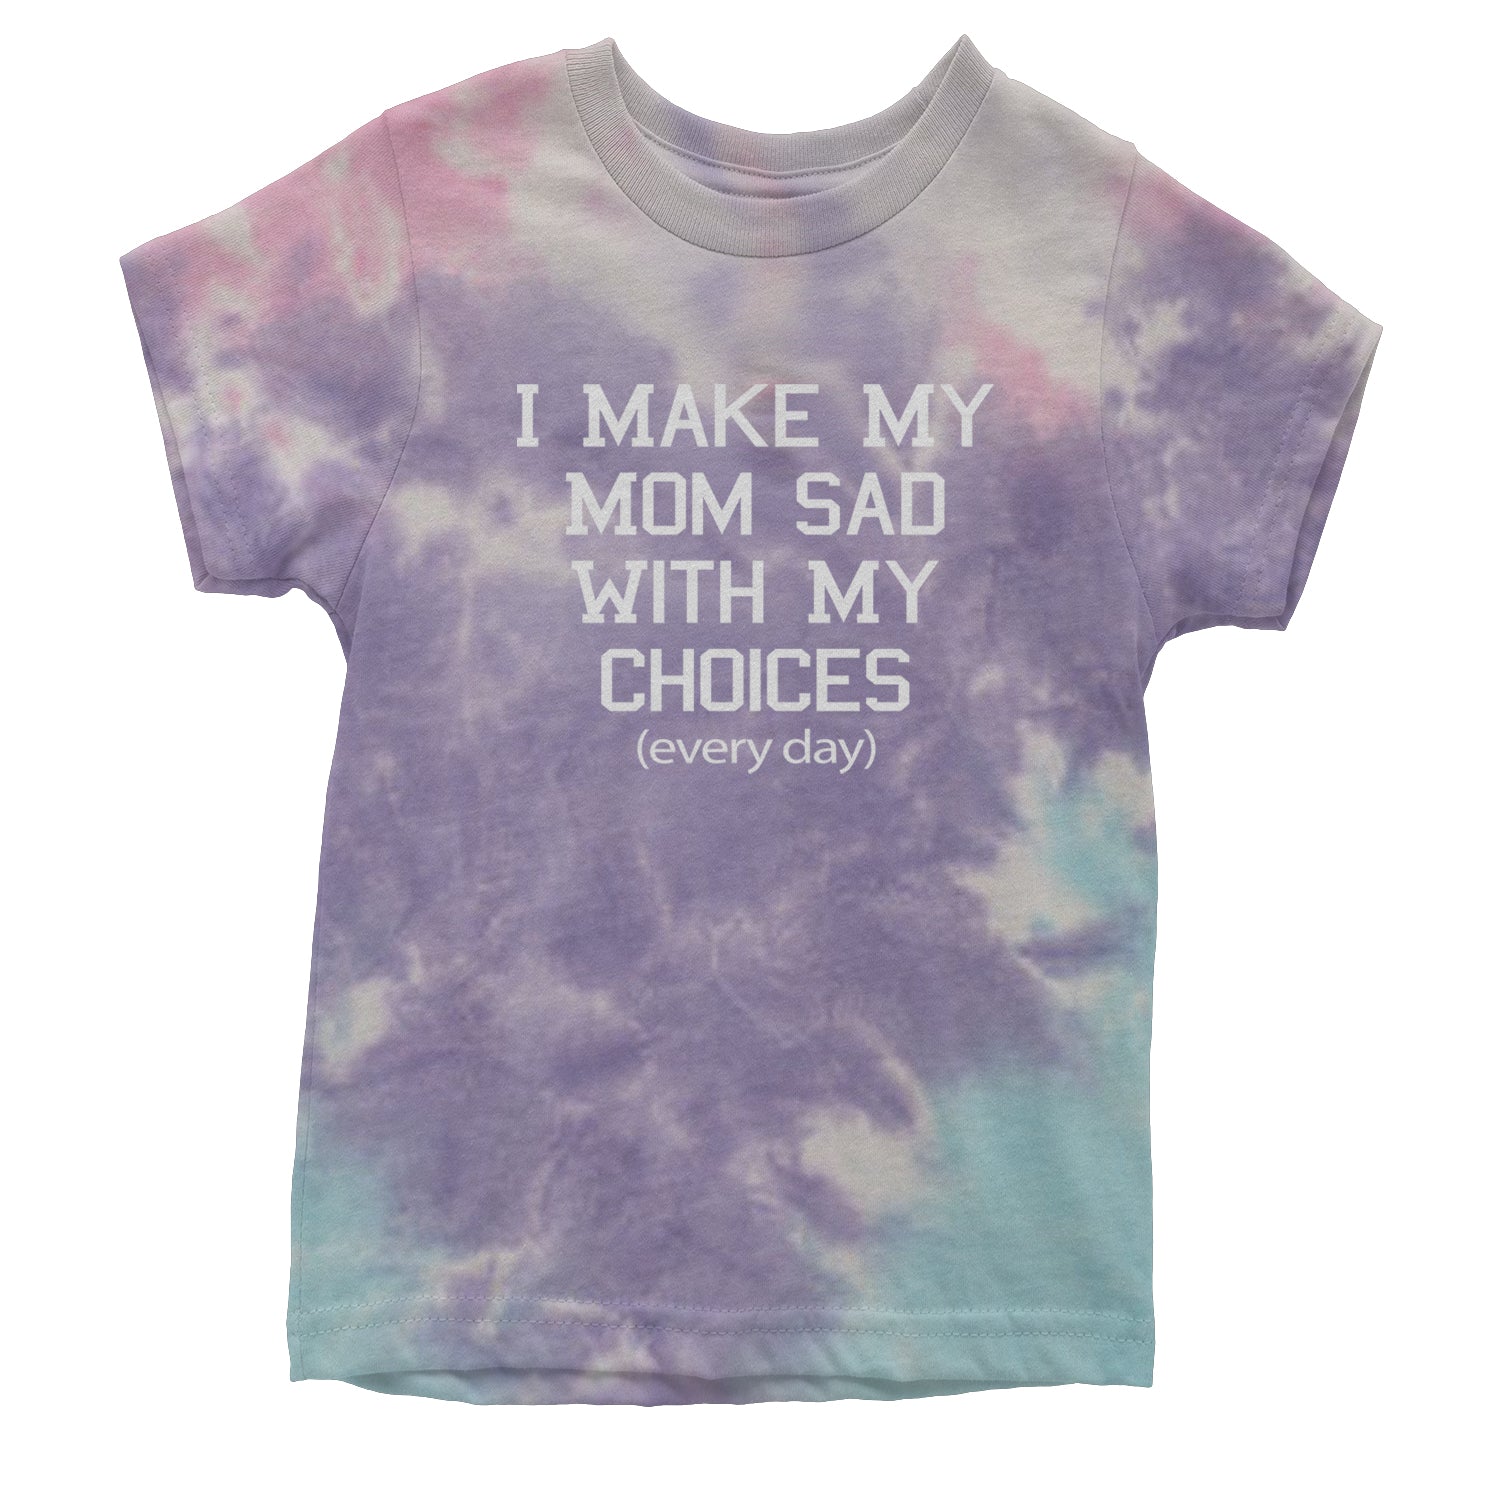 I Make My Mom Sad With My Choices Every Day Youth T-shirt funny, ironic, meme by Expression Tees